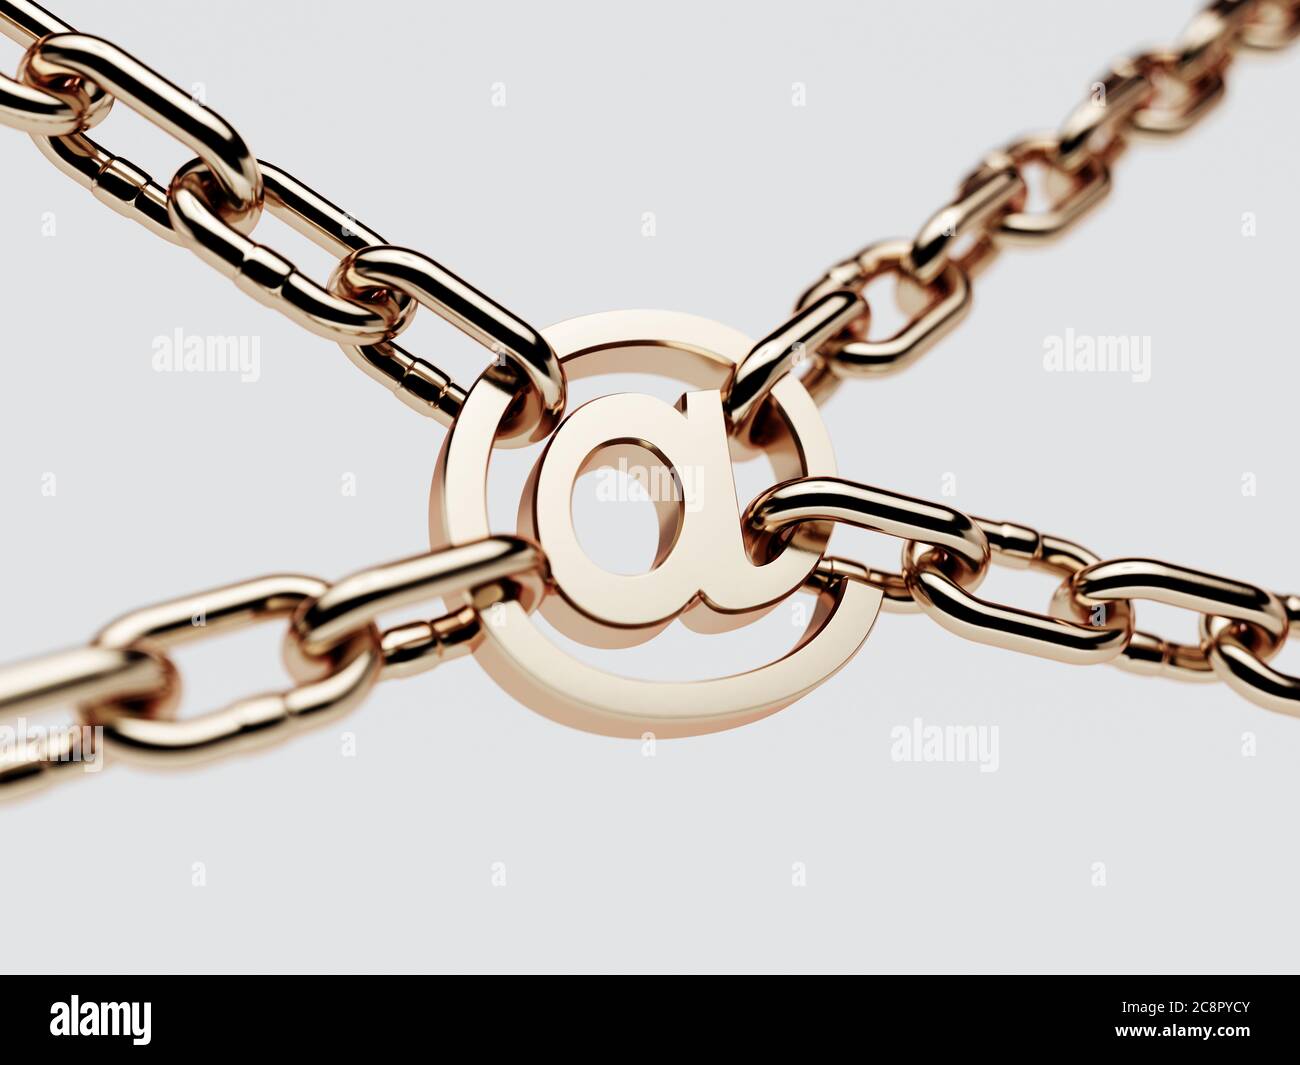 Email at golden symbol with metallic chain. 3d concept of protection e-mail, internet technology, business mail from virus,hacker, cyber attack Stock Photo